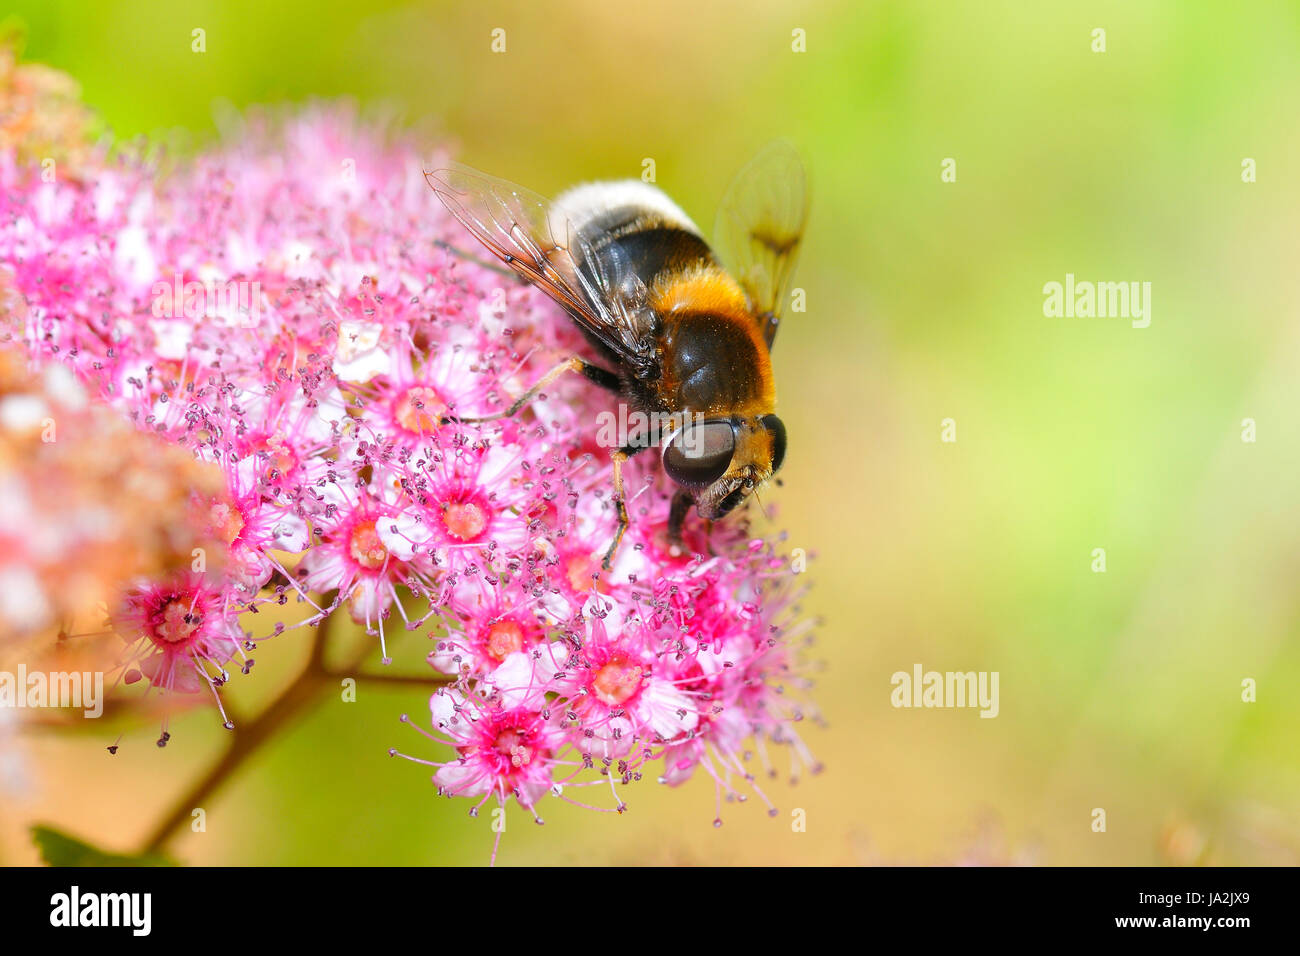 macro, close-up, macro admission, close up view, detail, insect, flower, Stock Photo